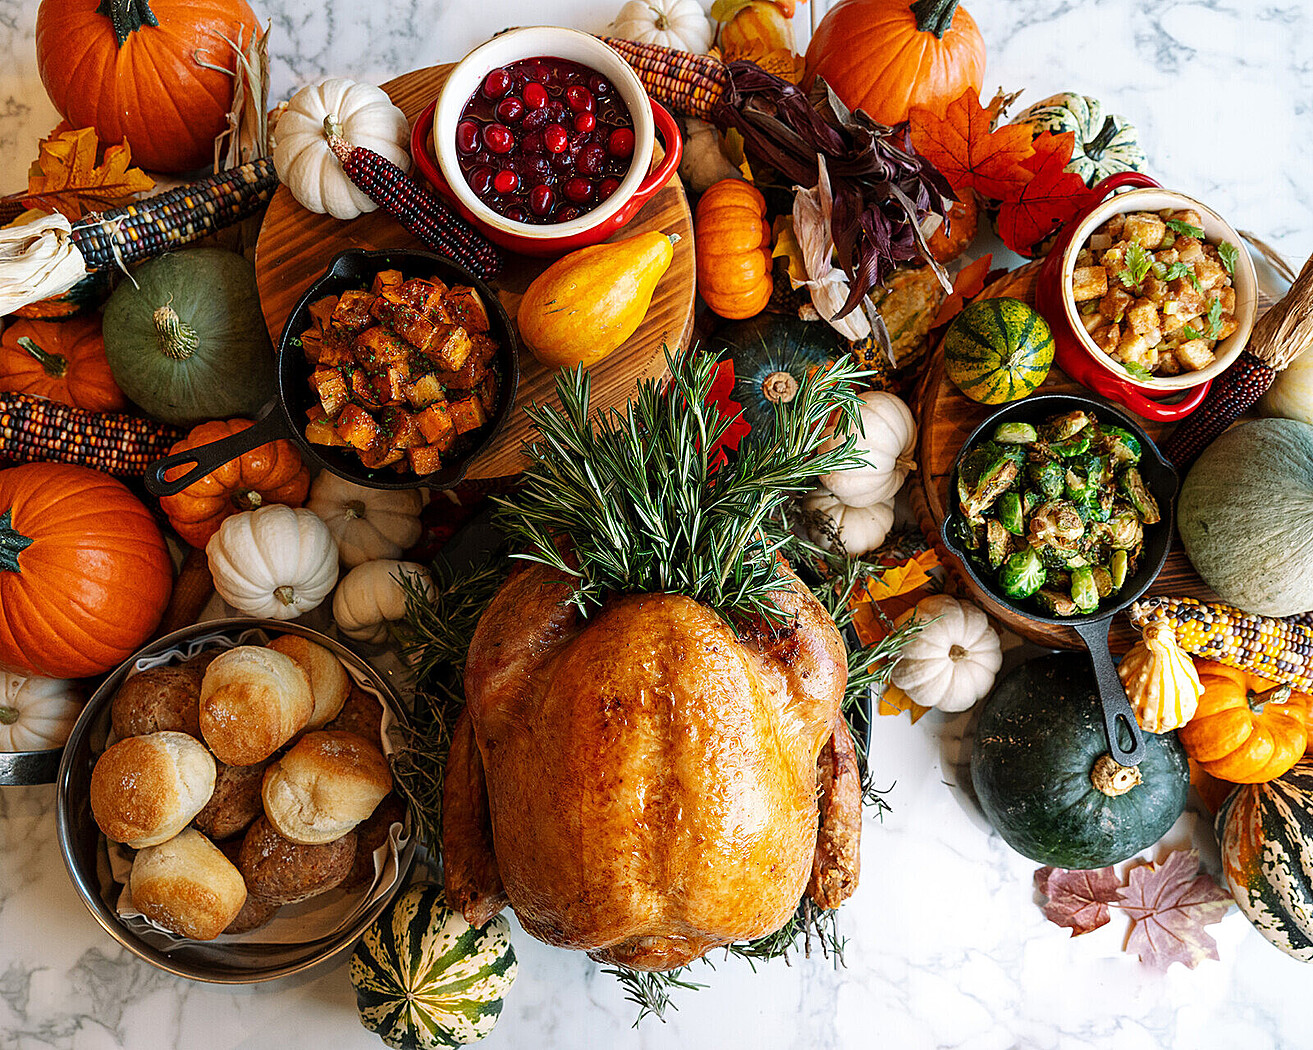 A Thanksgiving turkey table spread with pumpkins, squash, corn, and various dishes filled with vegetables, salads, biscuits, and cranberries